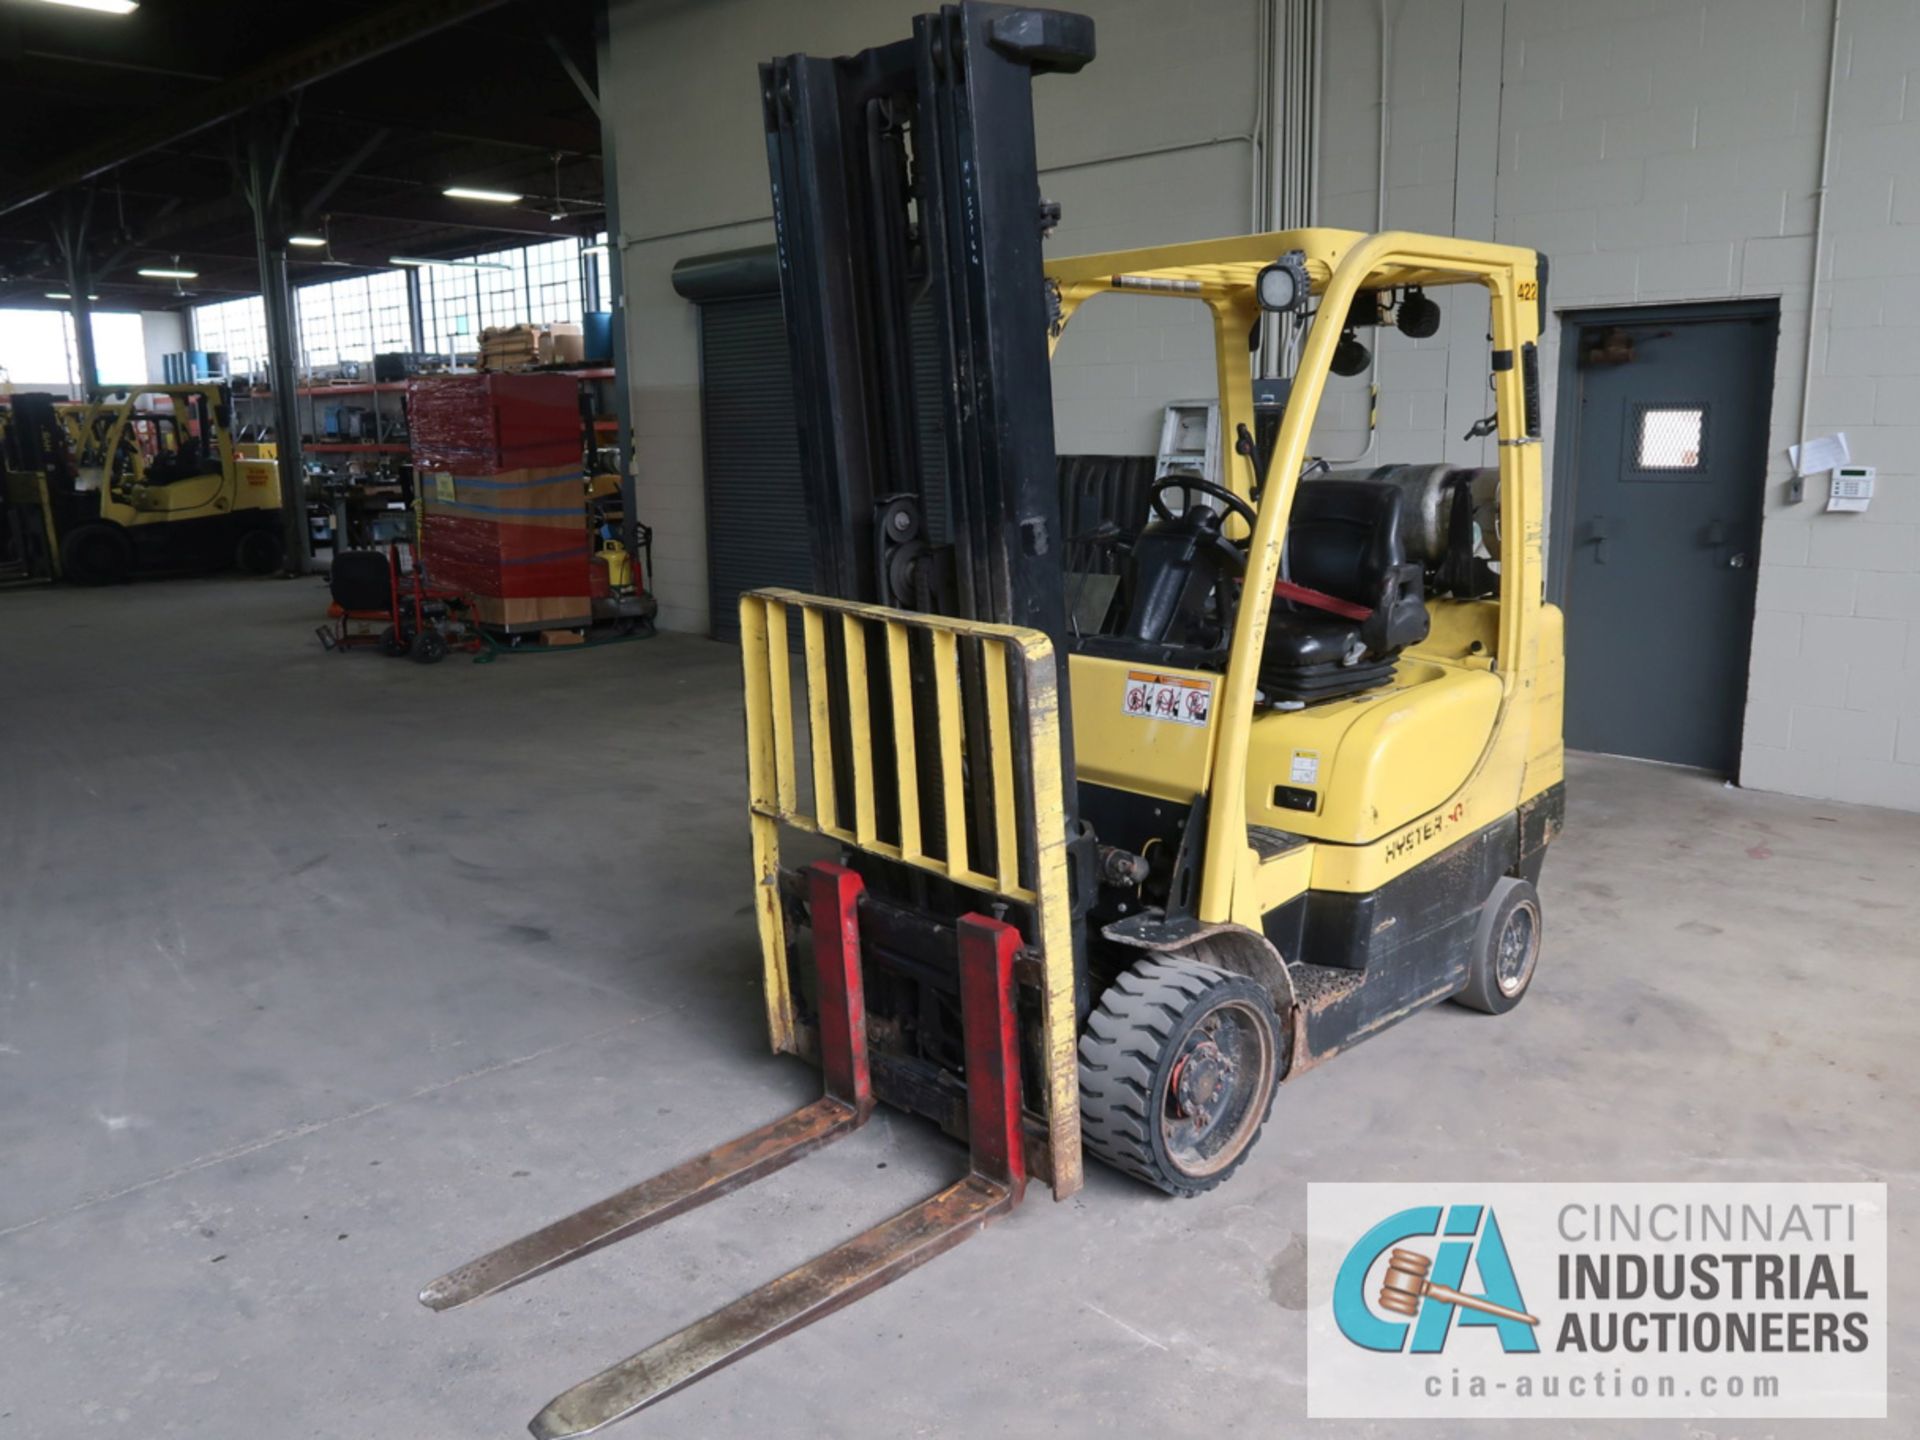 6,000 LB HYSTER MODEL S60FT LP GAS SOLID TIRE LIFT TRUCK WITH 3-STAGE MAST, 211" LIFT HEIGHT, 80"